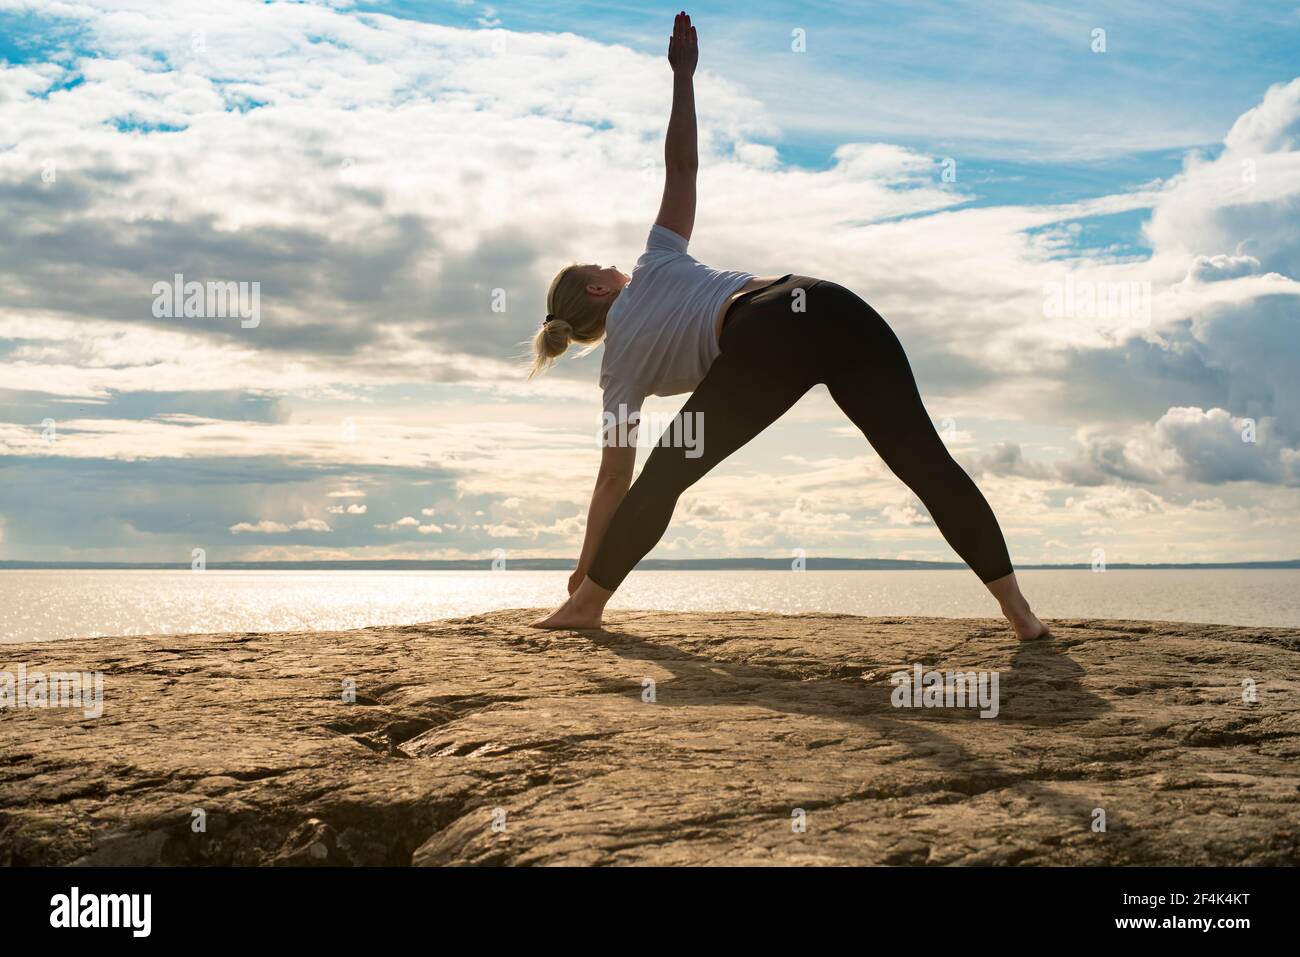 Woman practicing Yoga, meditation or stretching next to water on cliff Stock Photo